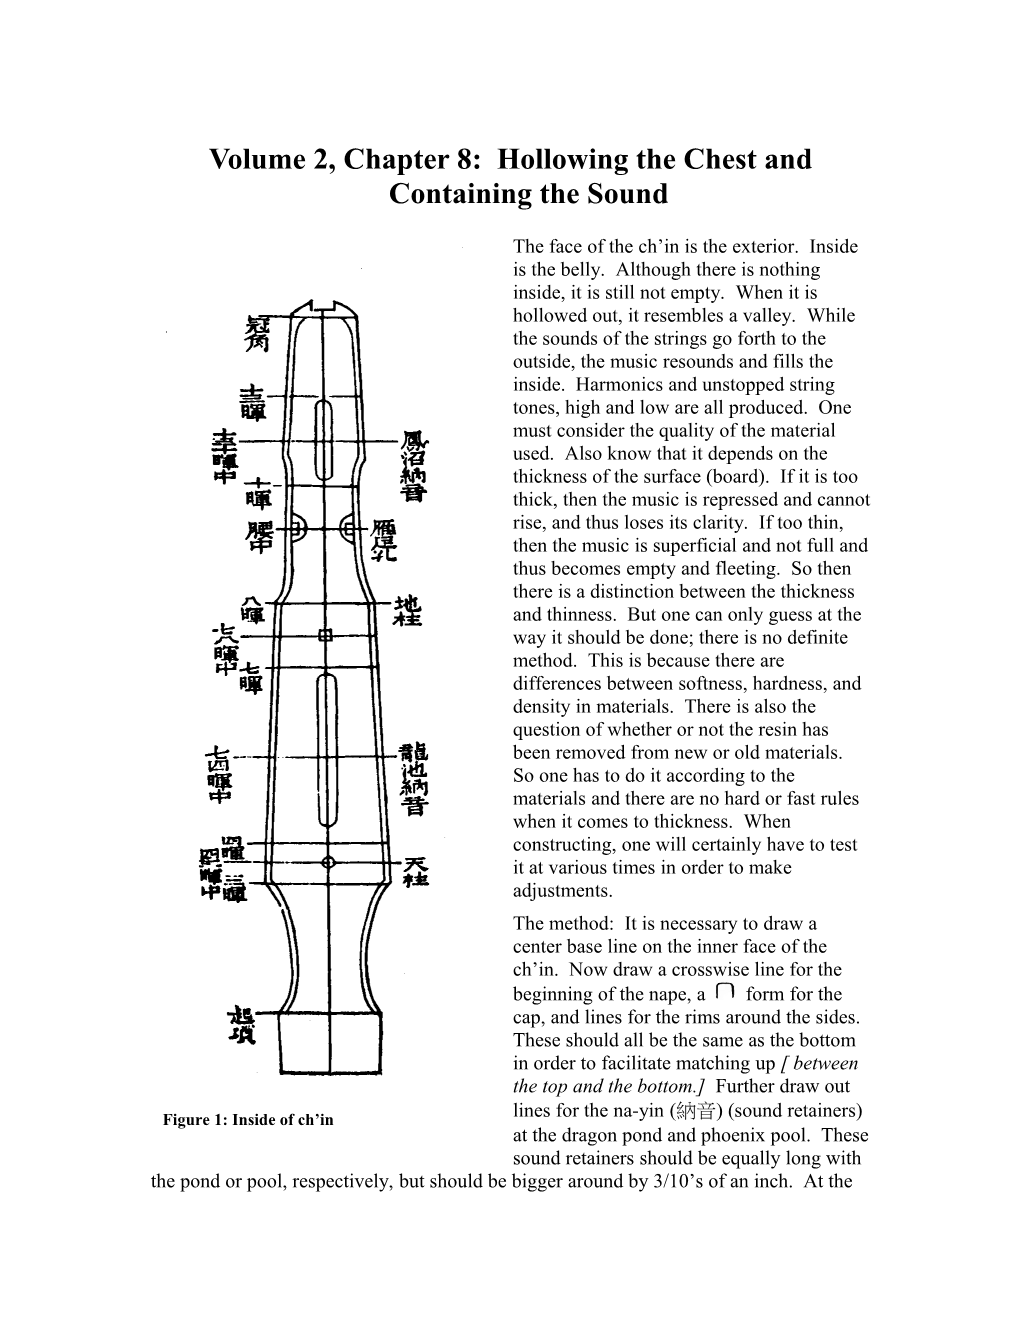 Volume 2, Chapter 8: Hollowing the Chest and Containing the Sound